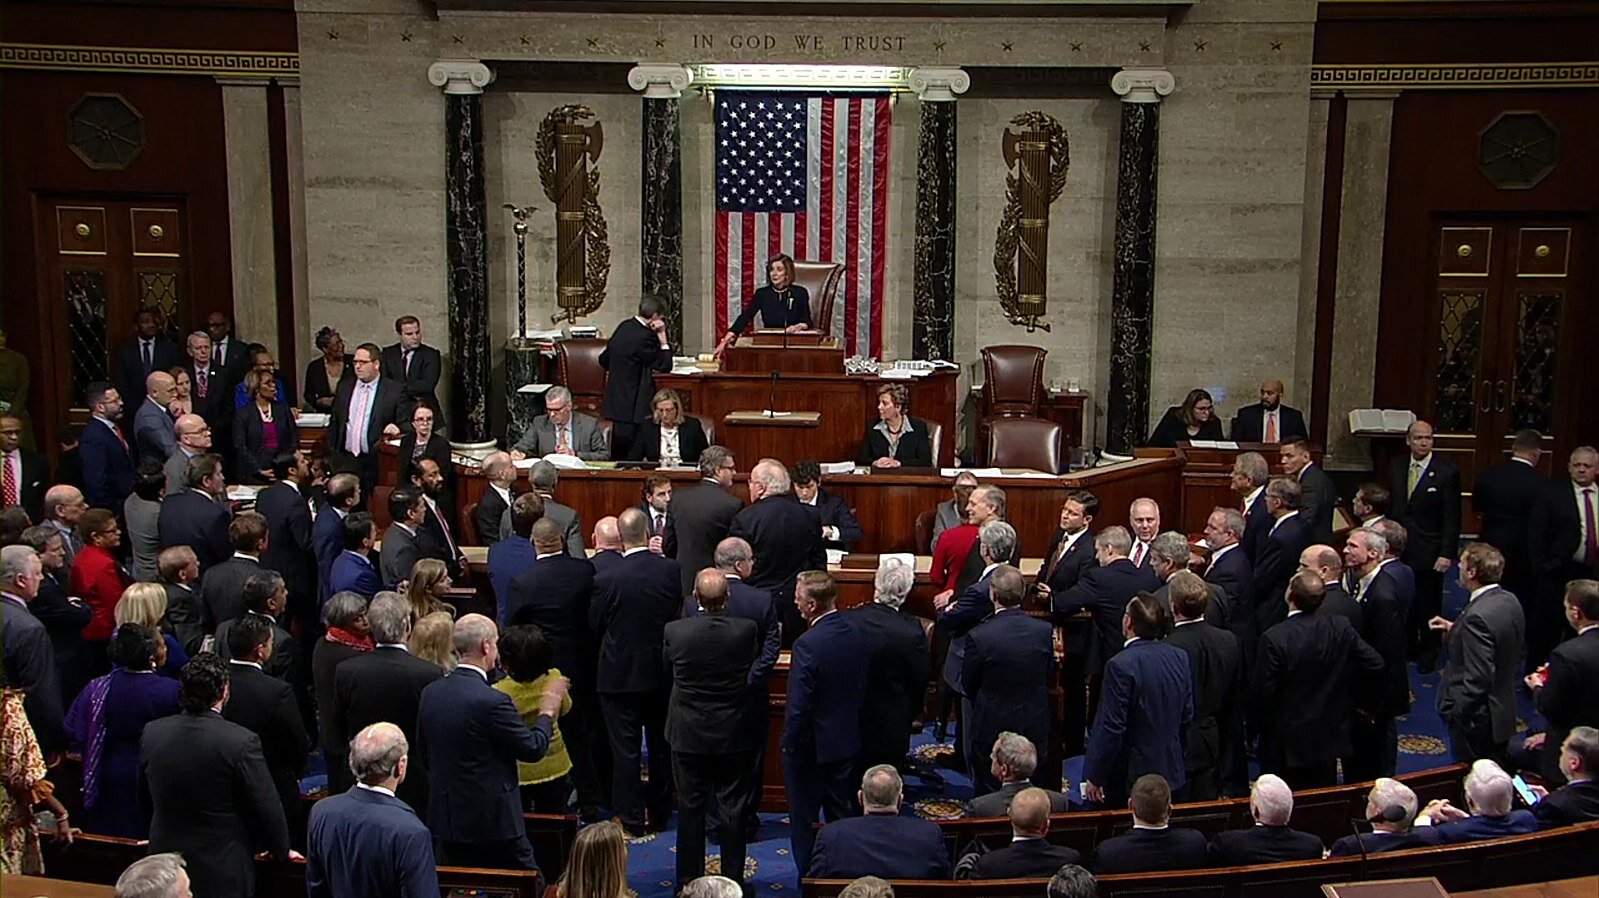 December 18, 2019 – United States House of Representatives votes to adopt the articles of impeachment, accusing Donald Trump of abuse of power and obstruction of Congress. (Photo from House Floorcast | Clerk of the U.S. House of Representatives)